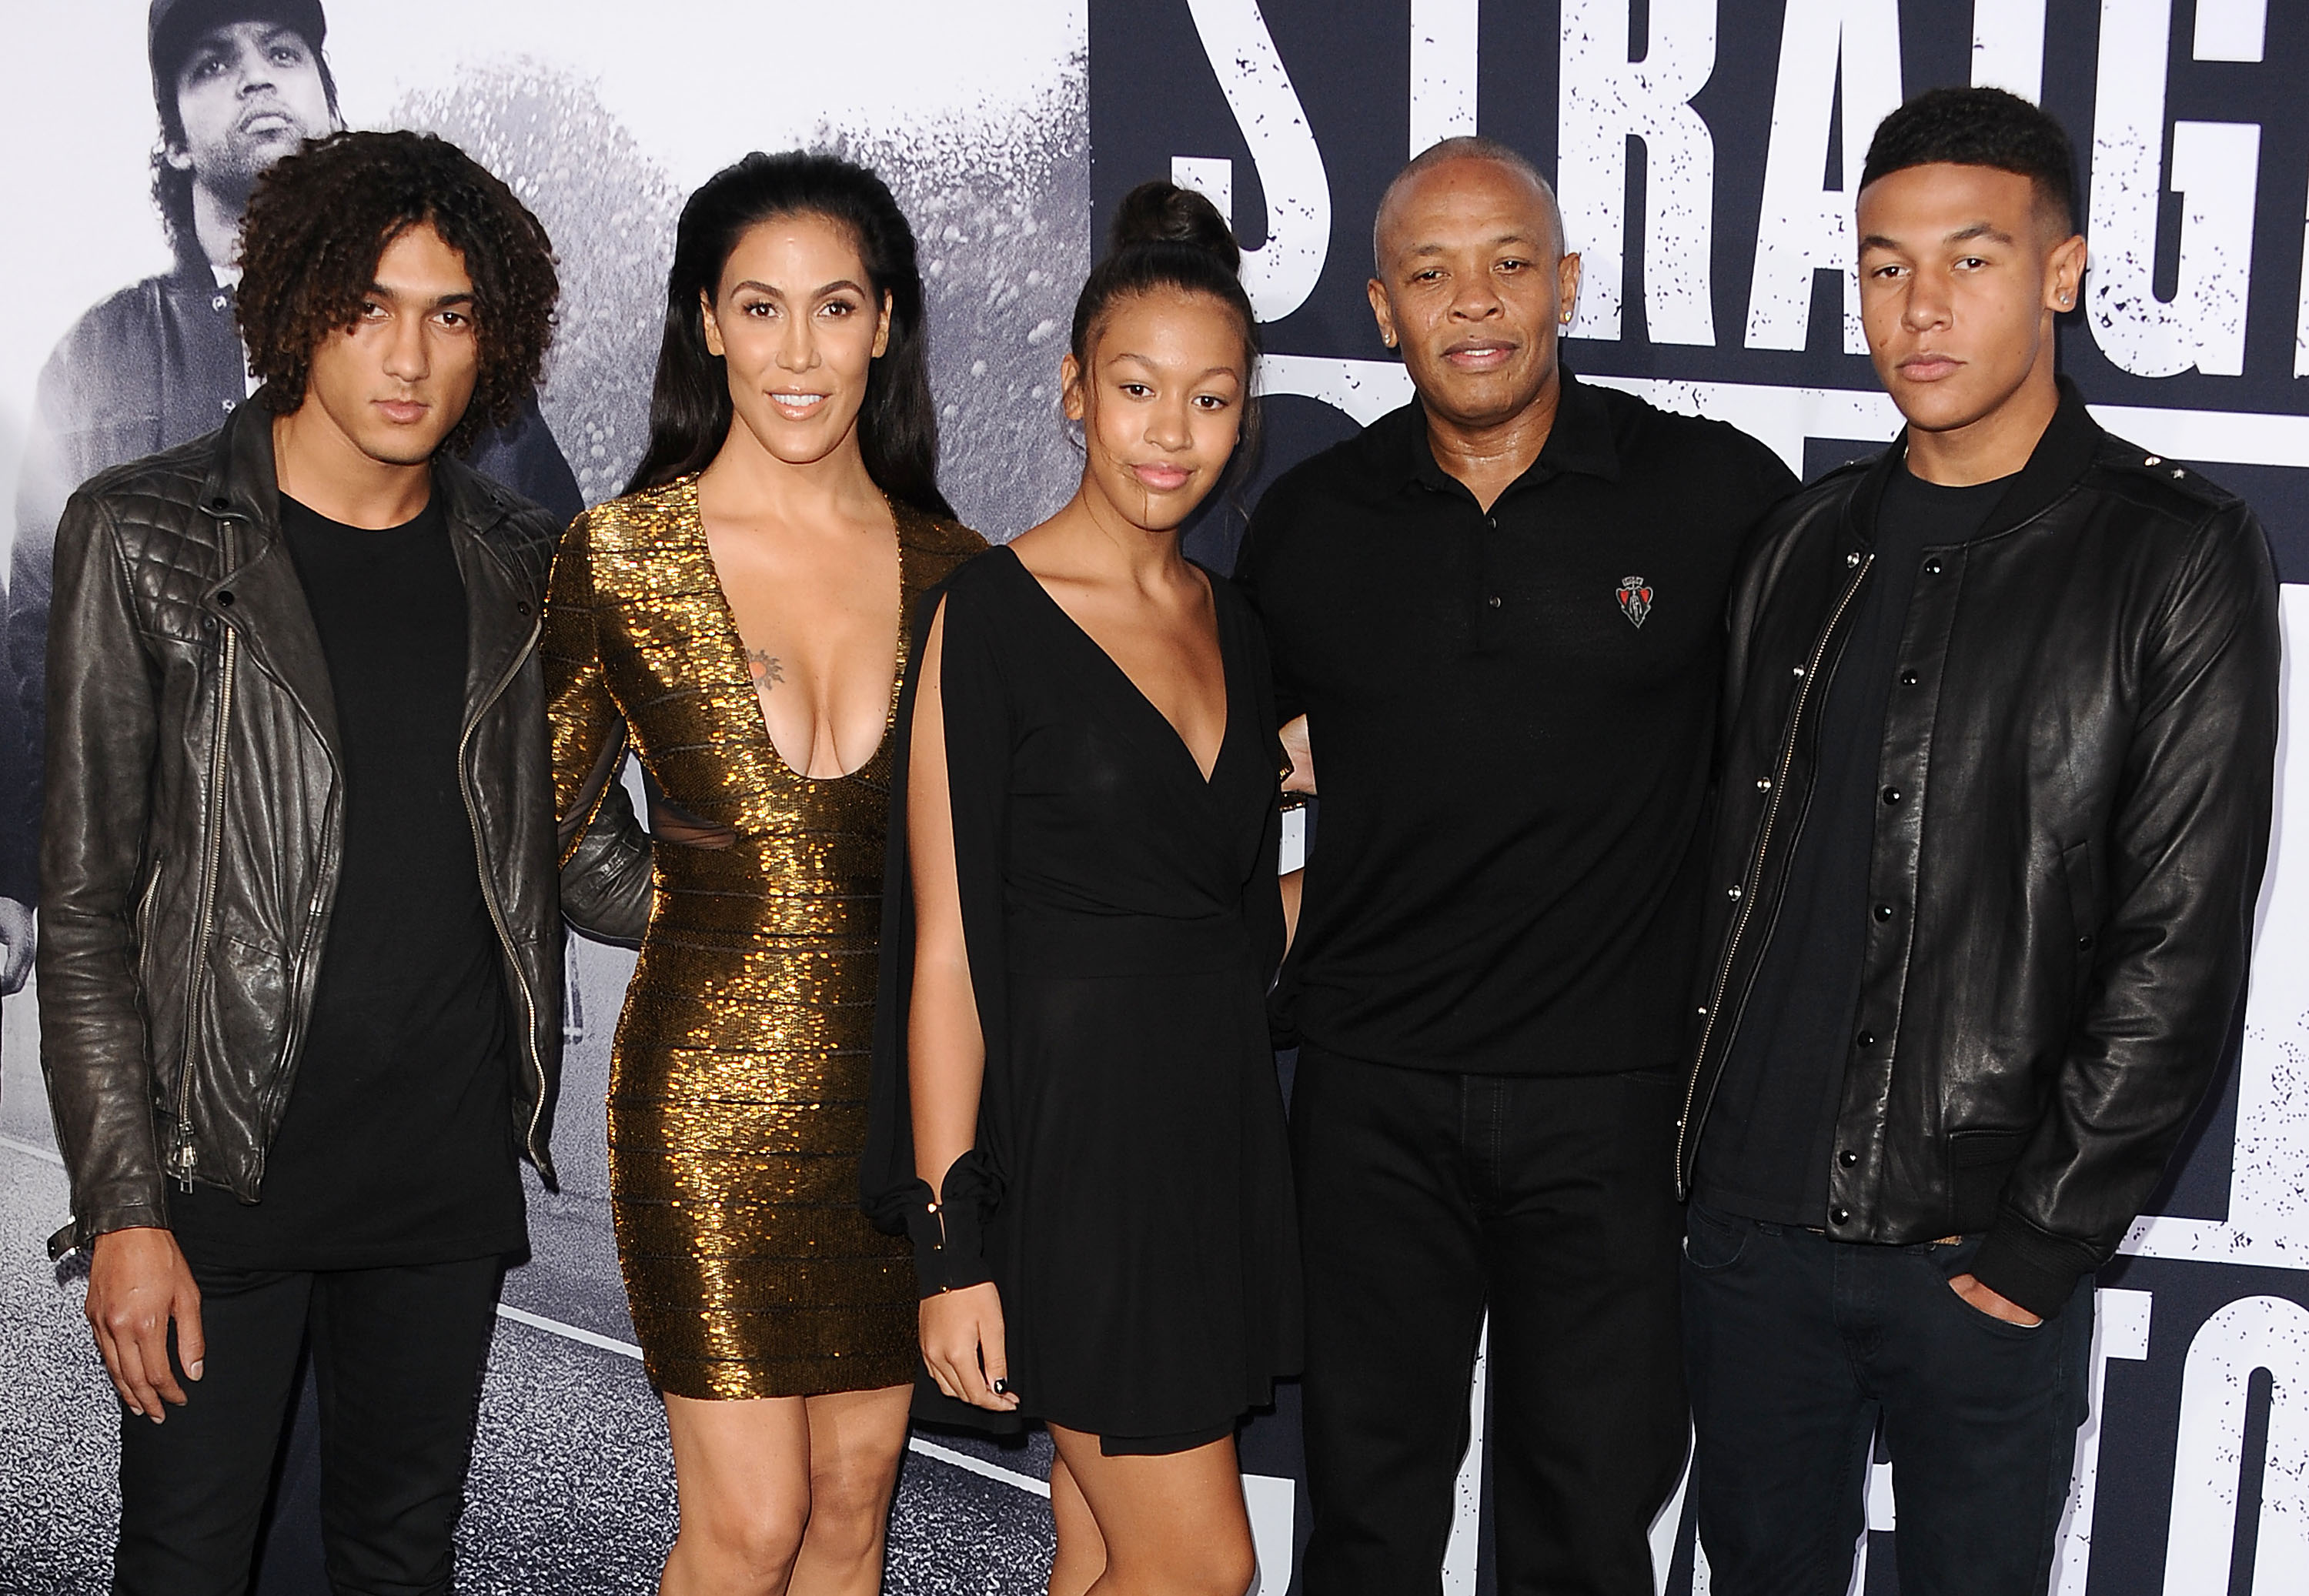 Dr. Dre, Nicole Young and family attend the premiere of "Straight Outta Compton" on August 10, 2015 in Los Angeles, California | Source: Getty Images